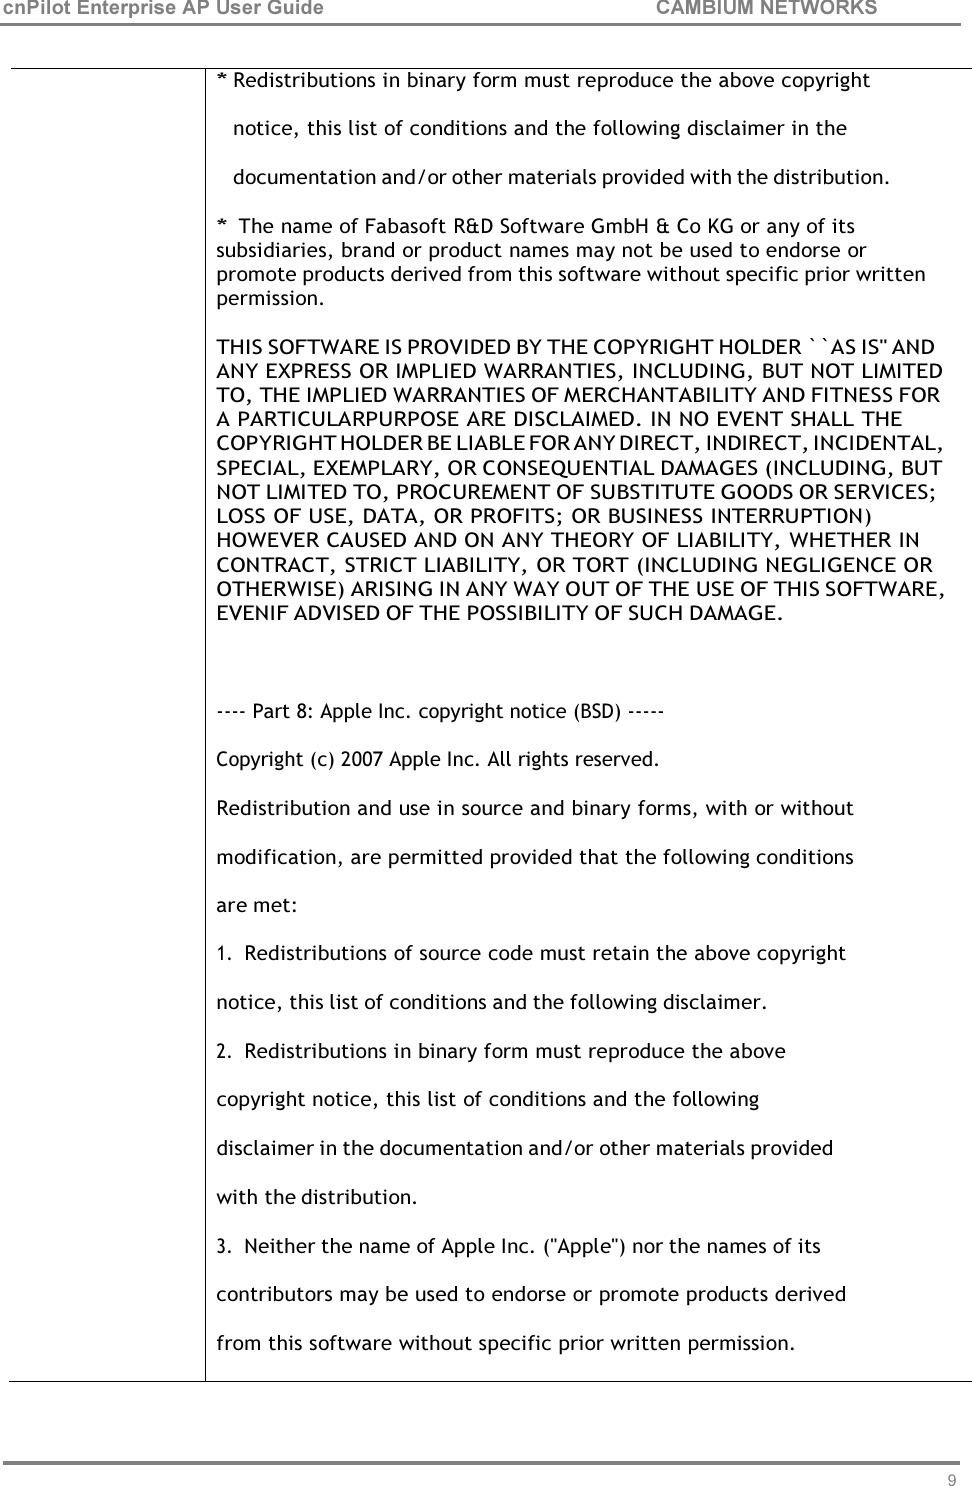 96 cnPilot Enterprise AP User Guide CAMBIUM NETWORKS      * Redistributions in binary form must reproduce the above copyright notice, this list of conditions and the following disclaimer in the documentation and/or other materials provided with the distribution. * The name of Fabasoft R&amp;D Software GmbH &amp; Co KG or any of its subsidiaries, brand or product names may not be used to endorse or promote products derived from this software without specific prior written permission.  THIS SOFTWARE IS PROVIDED BY THE COPYRIGHT HOLDER ``AS IS&apos;&apos; AND ANY EXPRESS OR IMPLIED WARRANTIES, INCLUDING, BUT NOT LIMITED TO, THE IMPLIED WARRANTIES OF MERCHANTABILITY AND FITNESS FOR A PARTICULARPURPOSE ARE DISCLAIMED. IN NO EVENT SHALL THE COPYRIGHT HOLDER BE LIABLE FOR ANY DIRECT, INDIRECT, INCIDENTAL, SPECIAL, EXEMPLARY, OR CONSEQUENTIAL DAMAGES (INCLUDING, BUT NOT LIMITED TO, PROCUREMENT OF SUBSTITUTE GOODS OR SERVICES; LOSS OF USE, DATA, OR PROFITS; OR BUSINESS INTERRUPTION) HOWEVER CAUSED AND ON ANY THEORY OF LIABILITY, WHETHER IN CONTRACT, STRICT LIABILITY, OR TORT (INCLUDING NEGLIGENCE OR OTHERWISE) ARISING IN ANY WAY OUT OF THE USE OF THIS SOFTWARE, EVENIF ADVISED OF THE POSSIBILITY OF SUCH DAMAGE.   ---- Part 8: Apple Inc. copyright notice (BSD) ----- Copyright (c) 2007 Apple Inc. All rights reserved. Redistribution and use in source and binary forms, with or without modification, are permitted provided that the following conditions are met: 1. Redistributions of source code must retain the above copyright notice, this list of conditions and the following disclaimer. 2. Redistributions in binary form must reproduce the above copyright notice, this list of conditions and the following disclaimer in the documentation and/or other materials provided with the distribution. 3. Neither the name of Apple Inc. (&quot;Apple&quot;) nor the names of its contributors may be used to endorse or promote products derived from this software without specific prior written permission. 